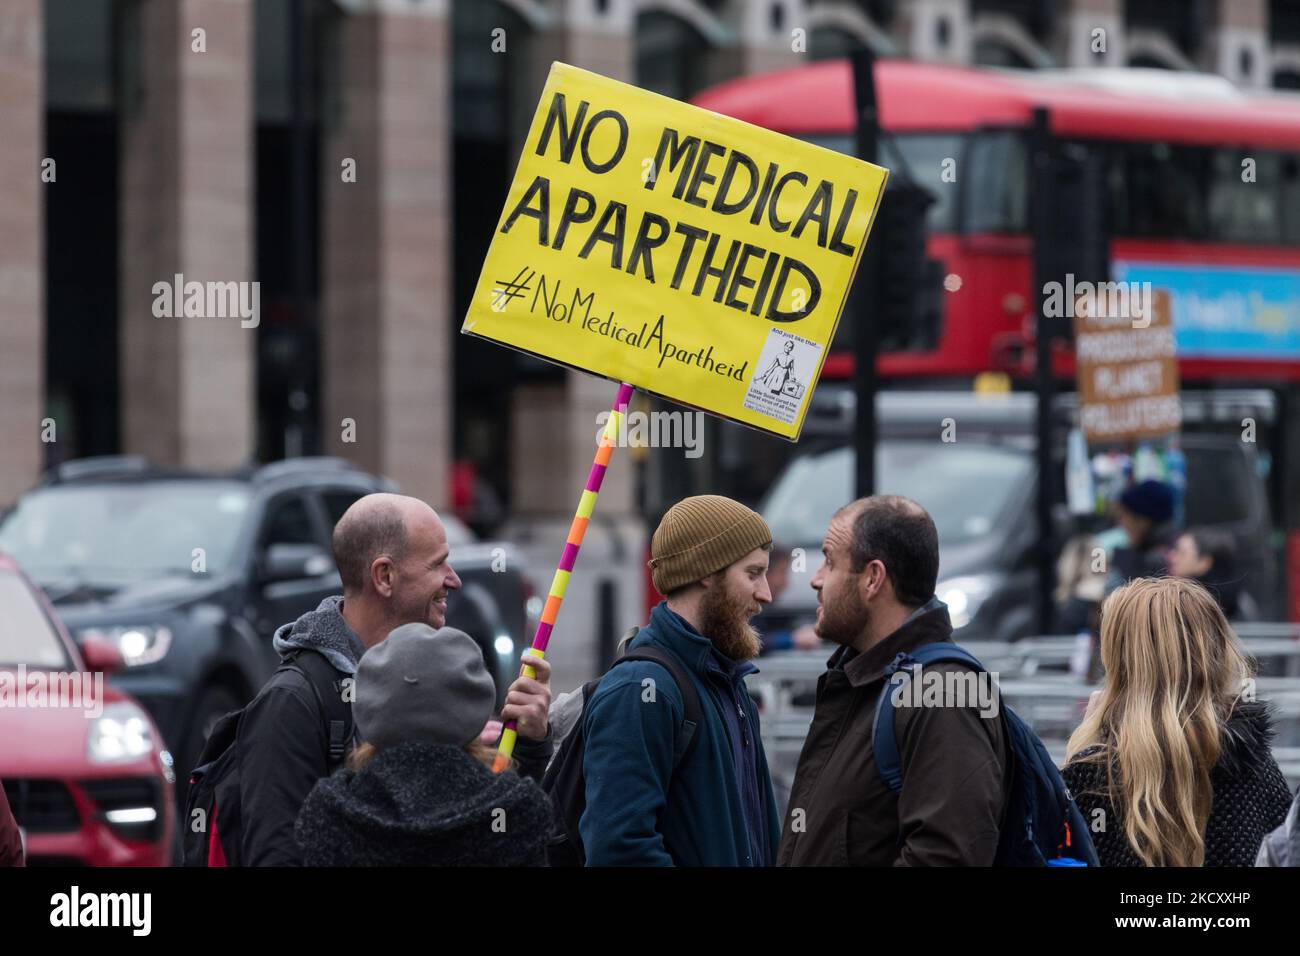 LONDON, UNITED KINGDOM - DECEMBER 15, 2021: Demonstrators protest outside Houses of Parliament against vaccine passports and mandates after MPs voted yesterday in favour of Covid vaccine certificates for some larger venues as well as mandatory vaccinations for NHS and social care workers in England on December 15, 2021 in London, England. The measures approved by MPs are part of the government's winter Plan B introduced in response to the emergence of the new coronavirus variant - Omicron - and a rapid rise in cases in the run up to Christmas. (Photo by WIktor Szymanowicz/NurPhoto) Stock Photo